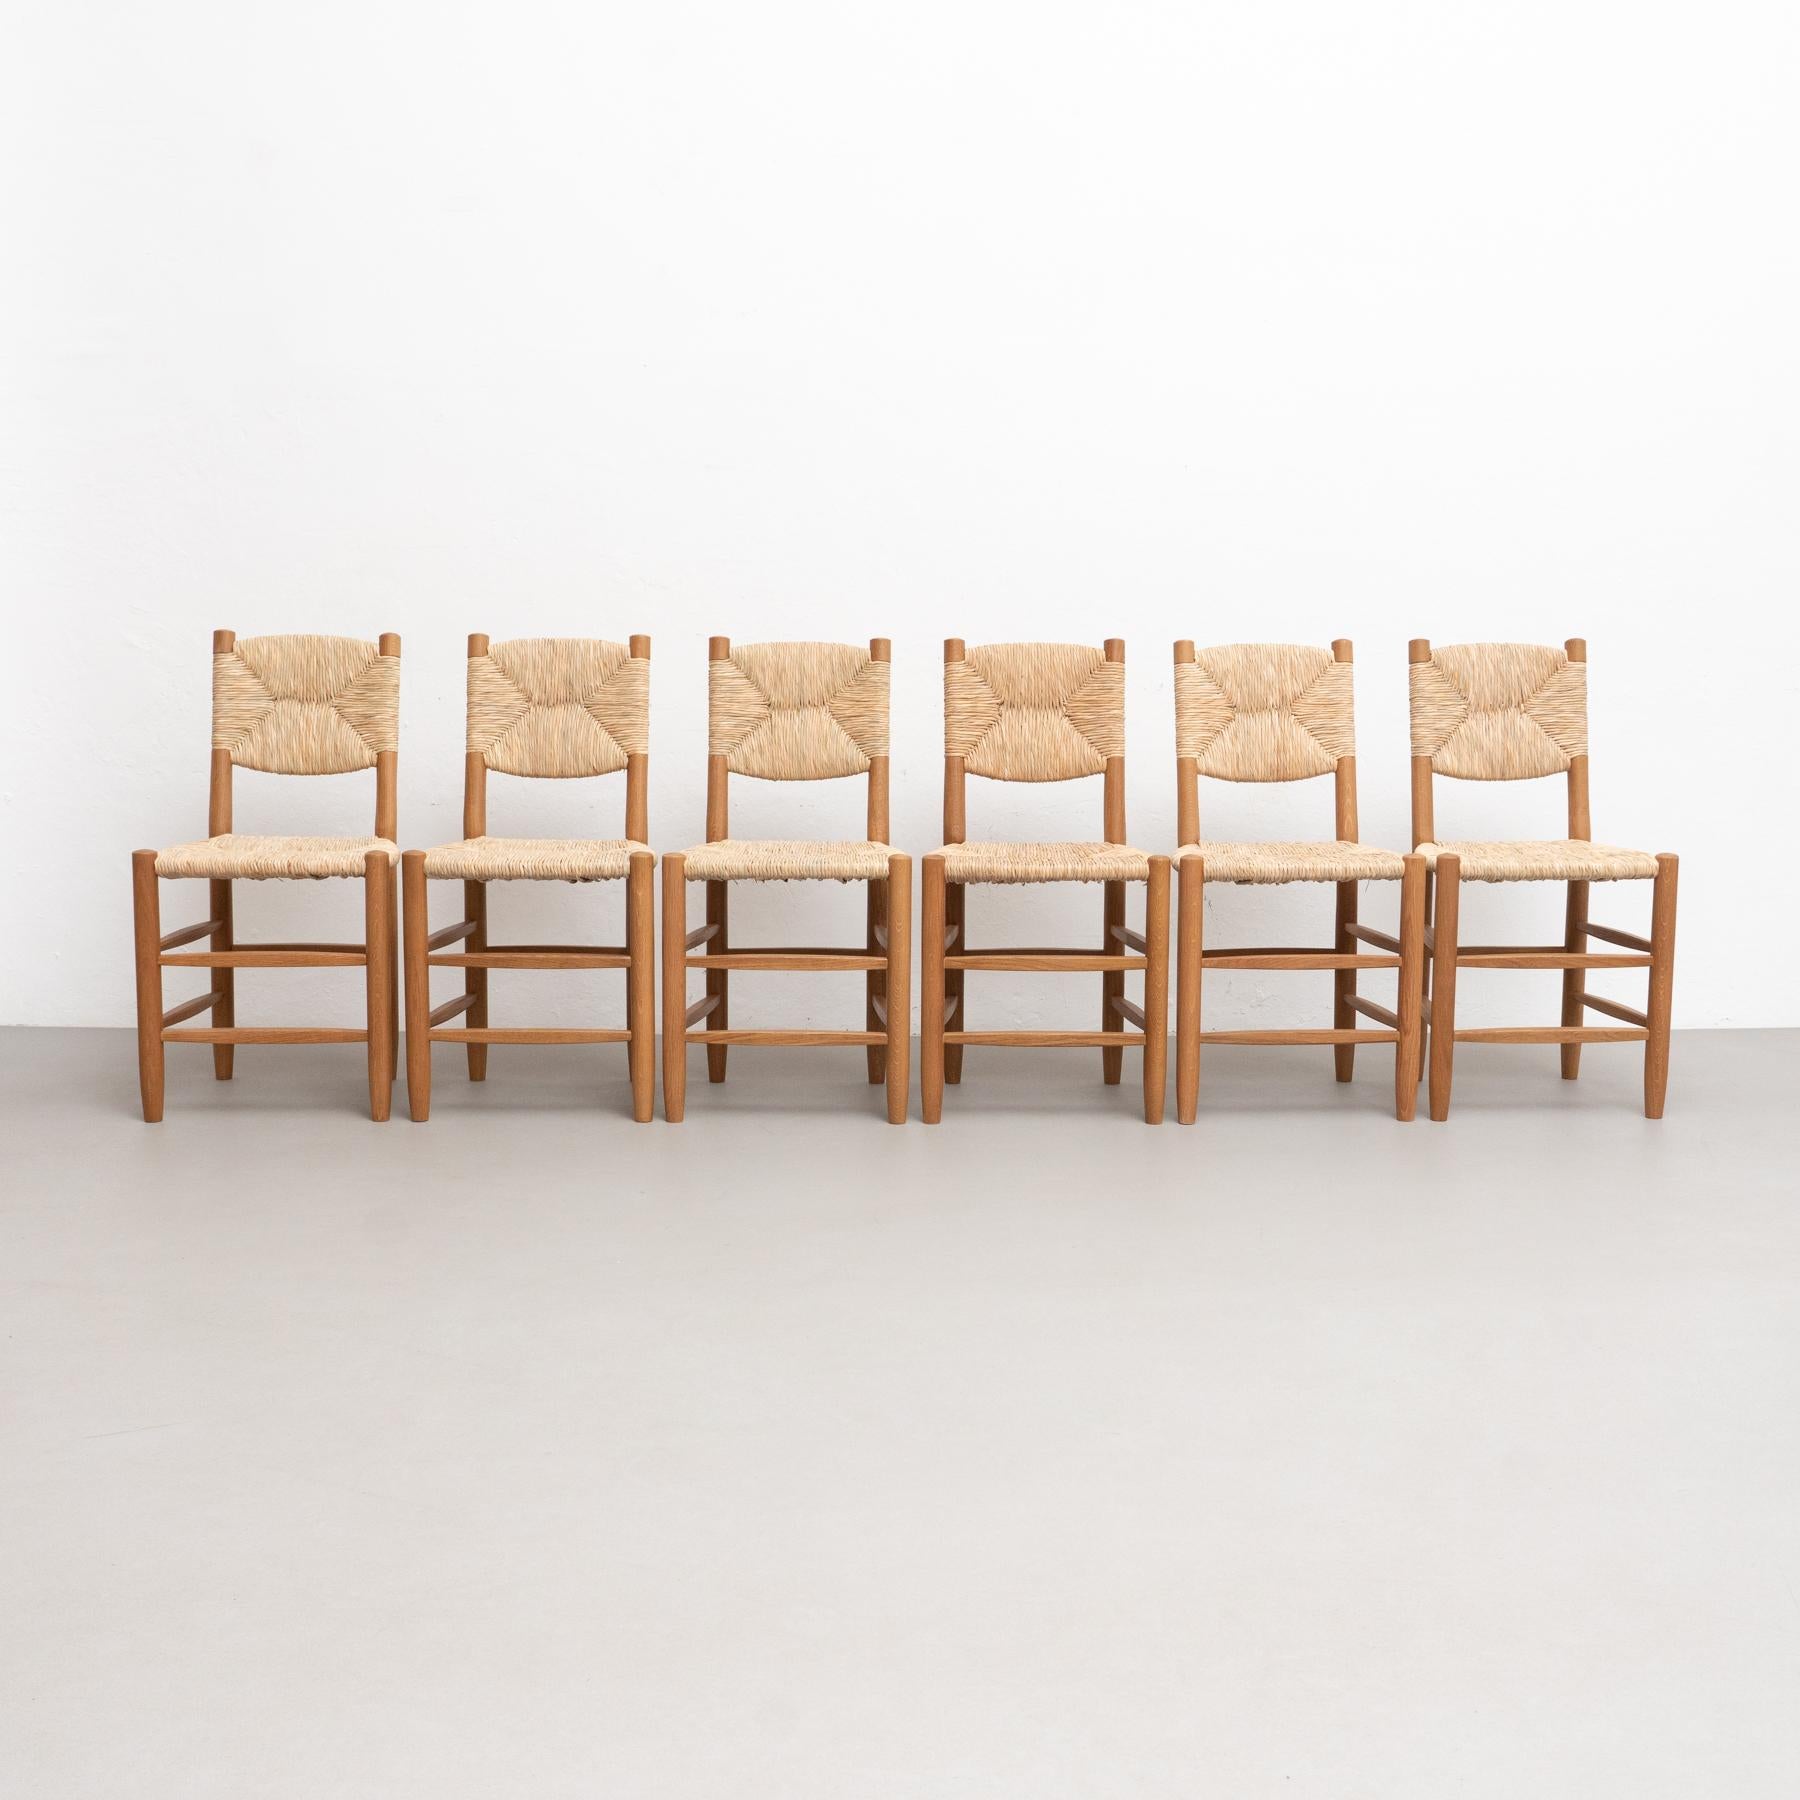 French Set of 6 After Charlotte Perriand n.19 Chairs, Wood Rattan, Mid-Century Modern For Sale